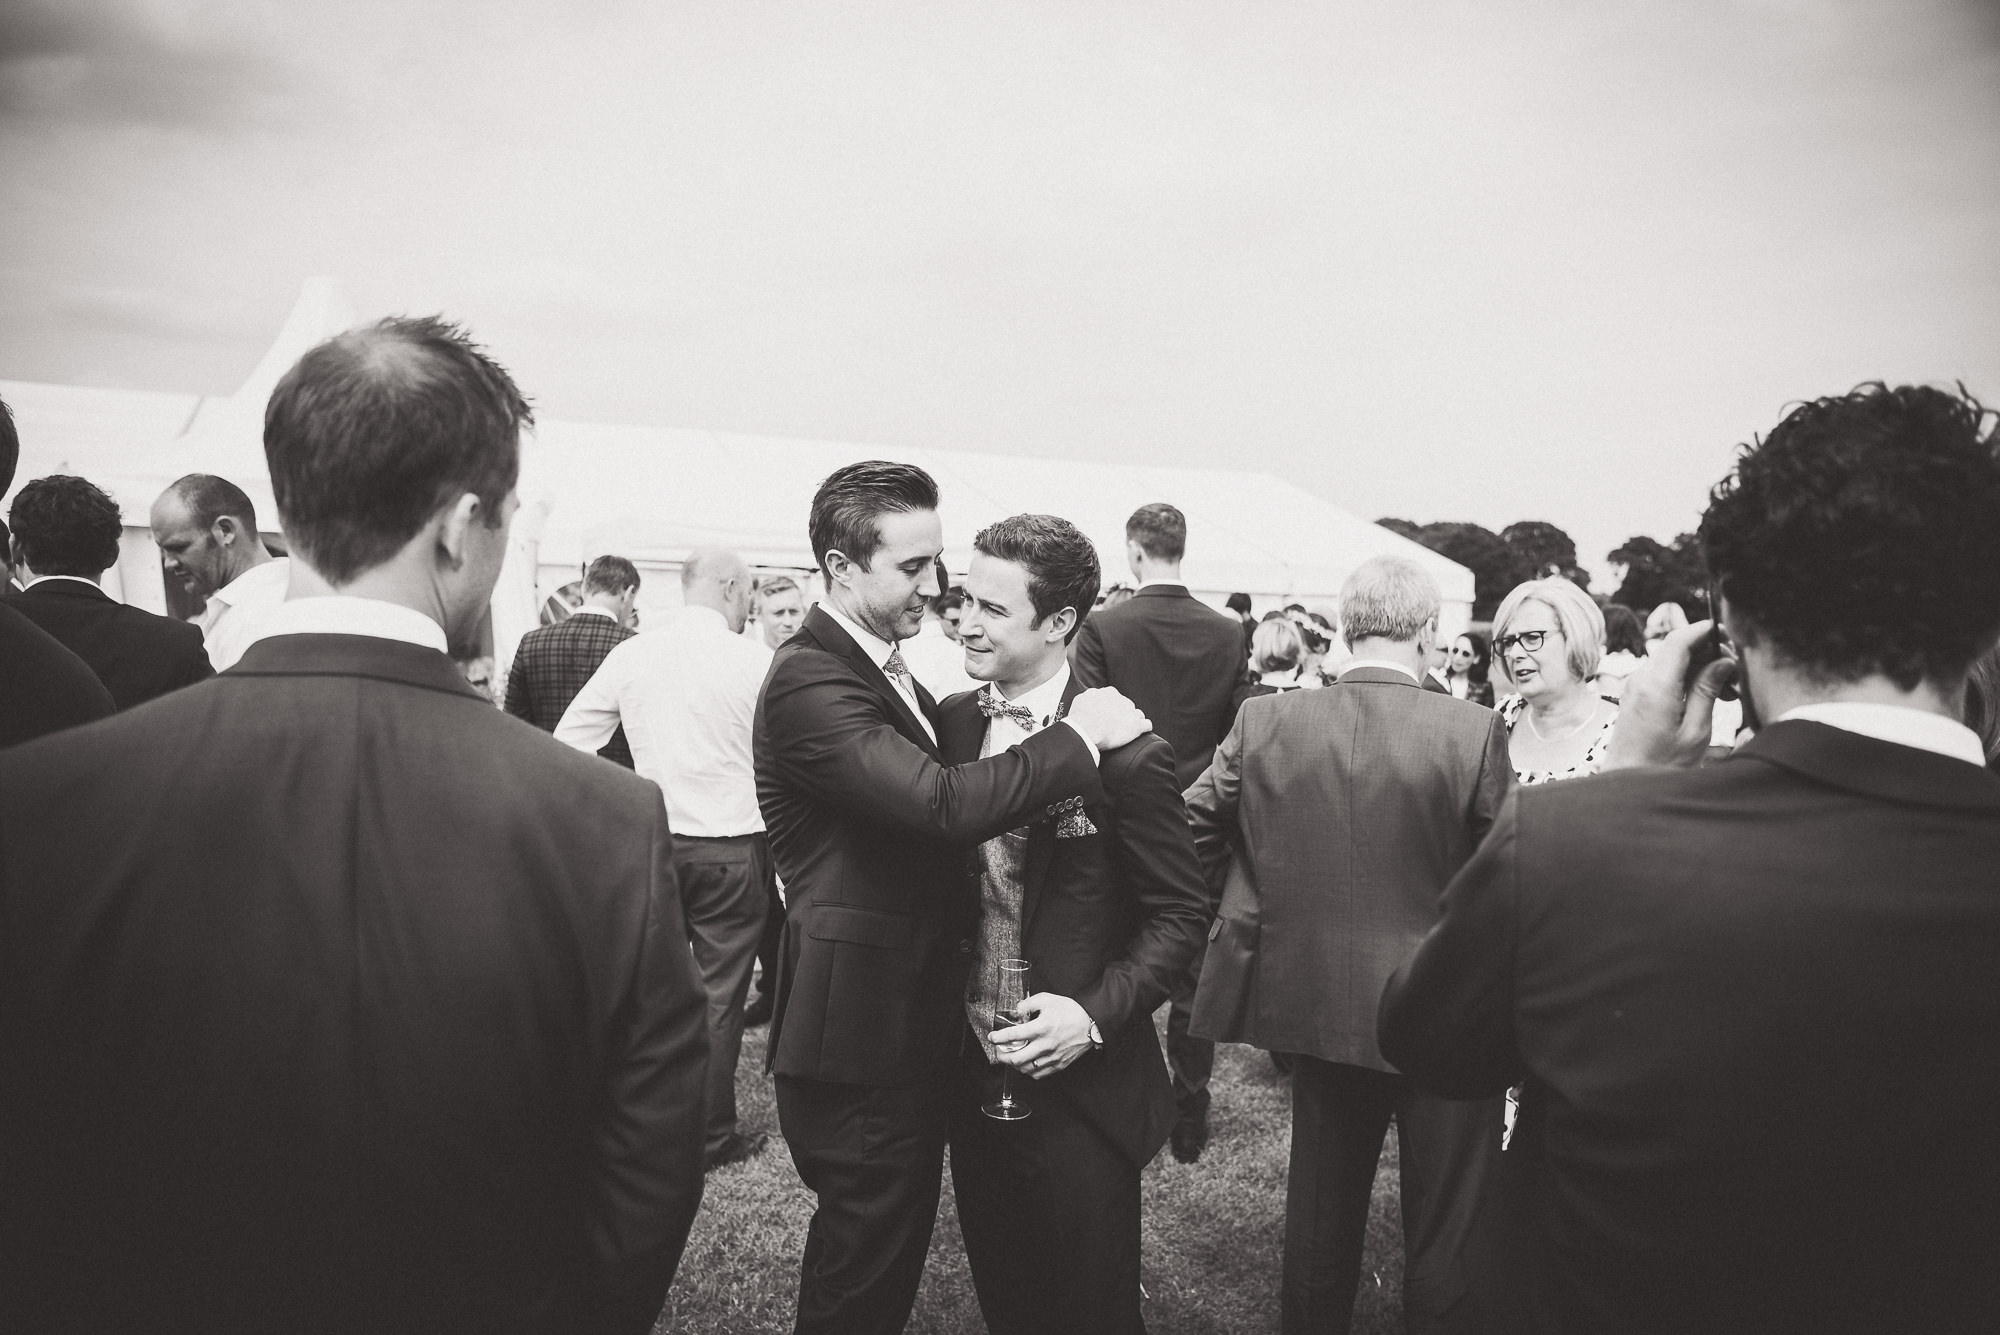 A black and white groom hugging his best man at a wedding.